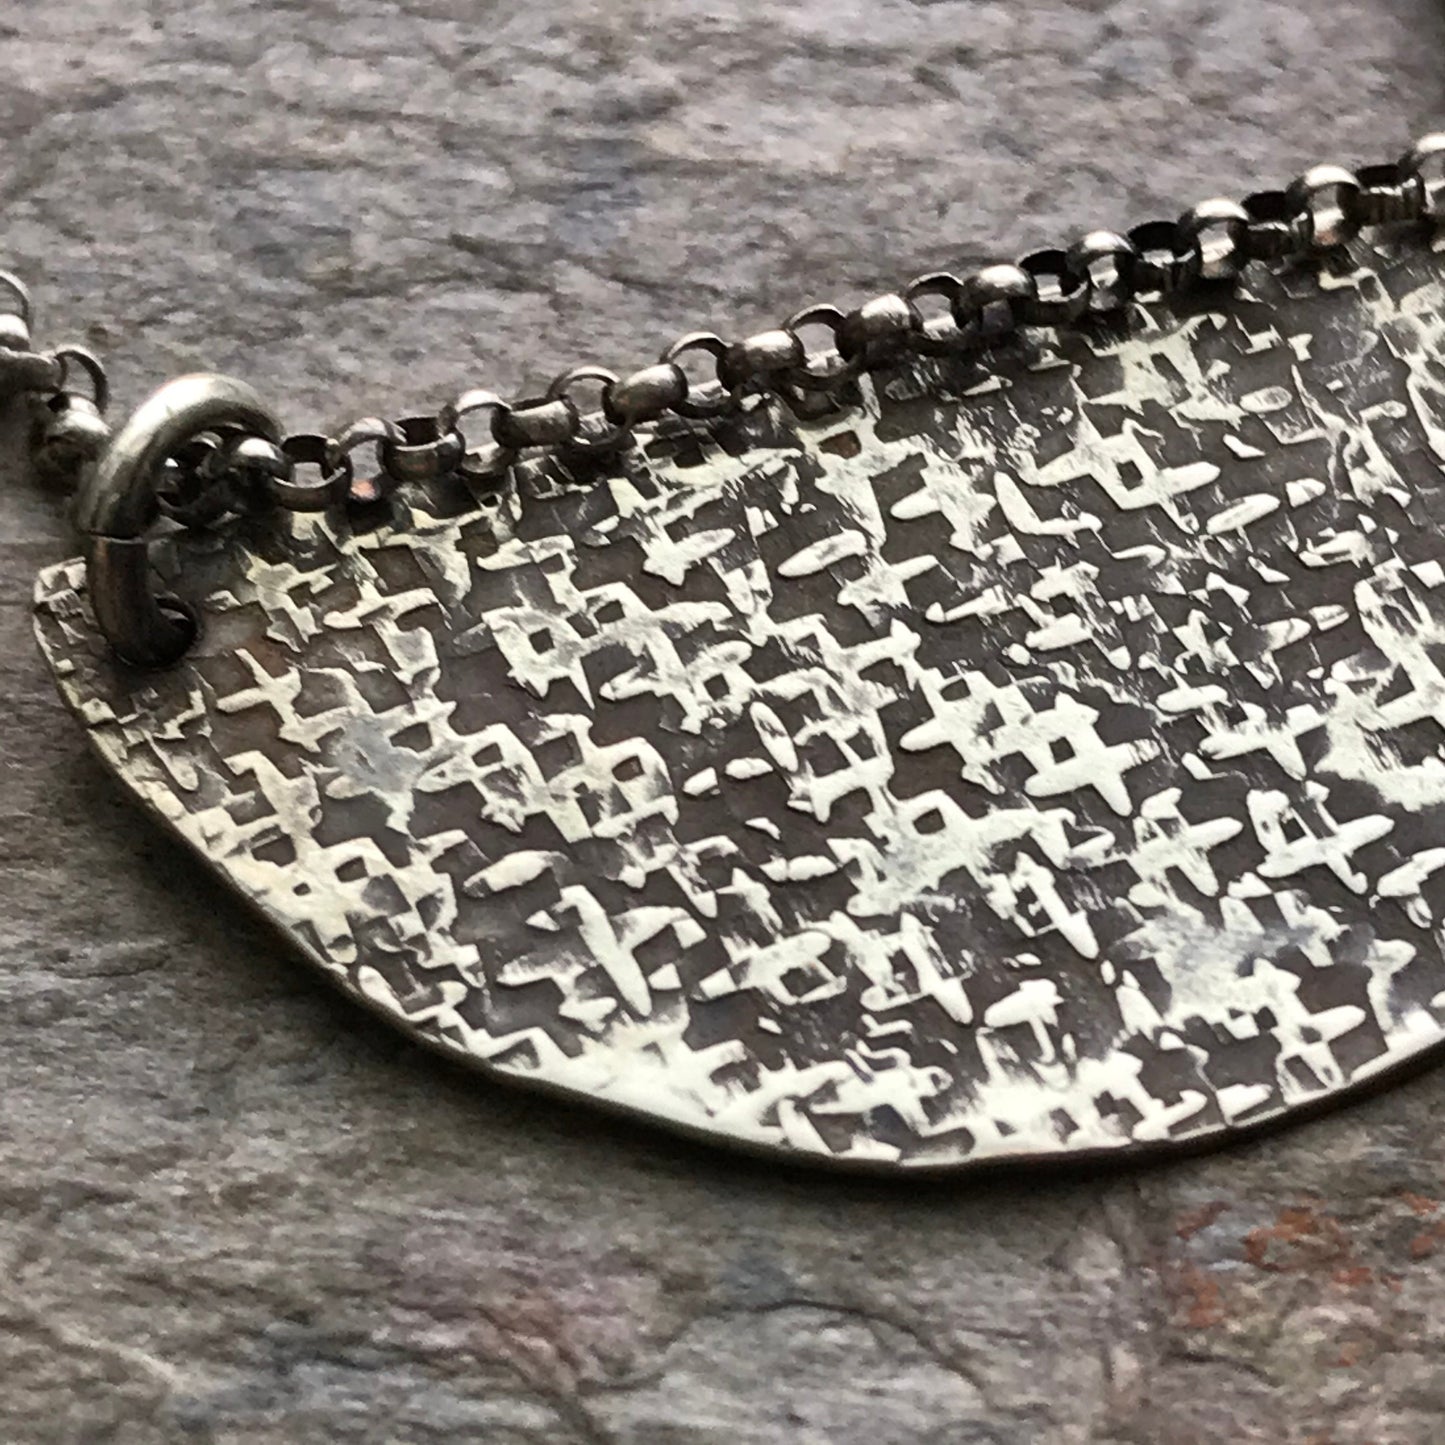 Sterling Silver Semicircle Necklace - Distressed Sterling Silver Half Disc Pendant on Sterling Silver Chain